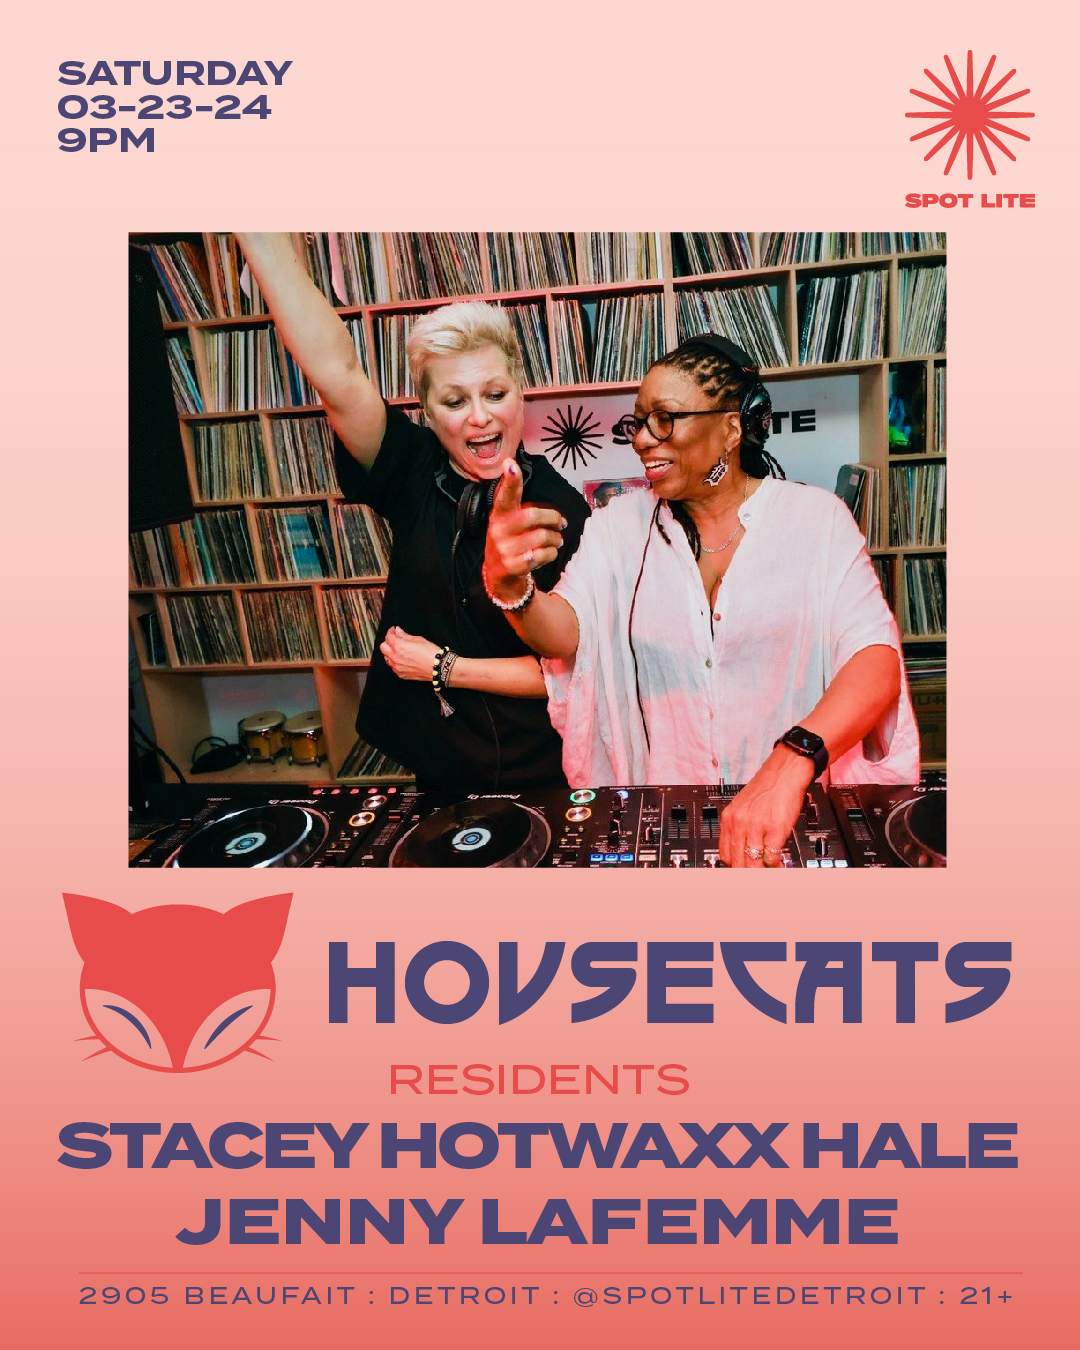 Housecats featuring Stacey Hotwaxx Hale & Jenny Lafemme - Página frontal